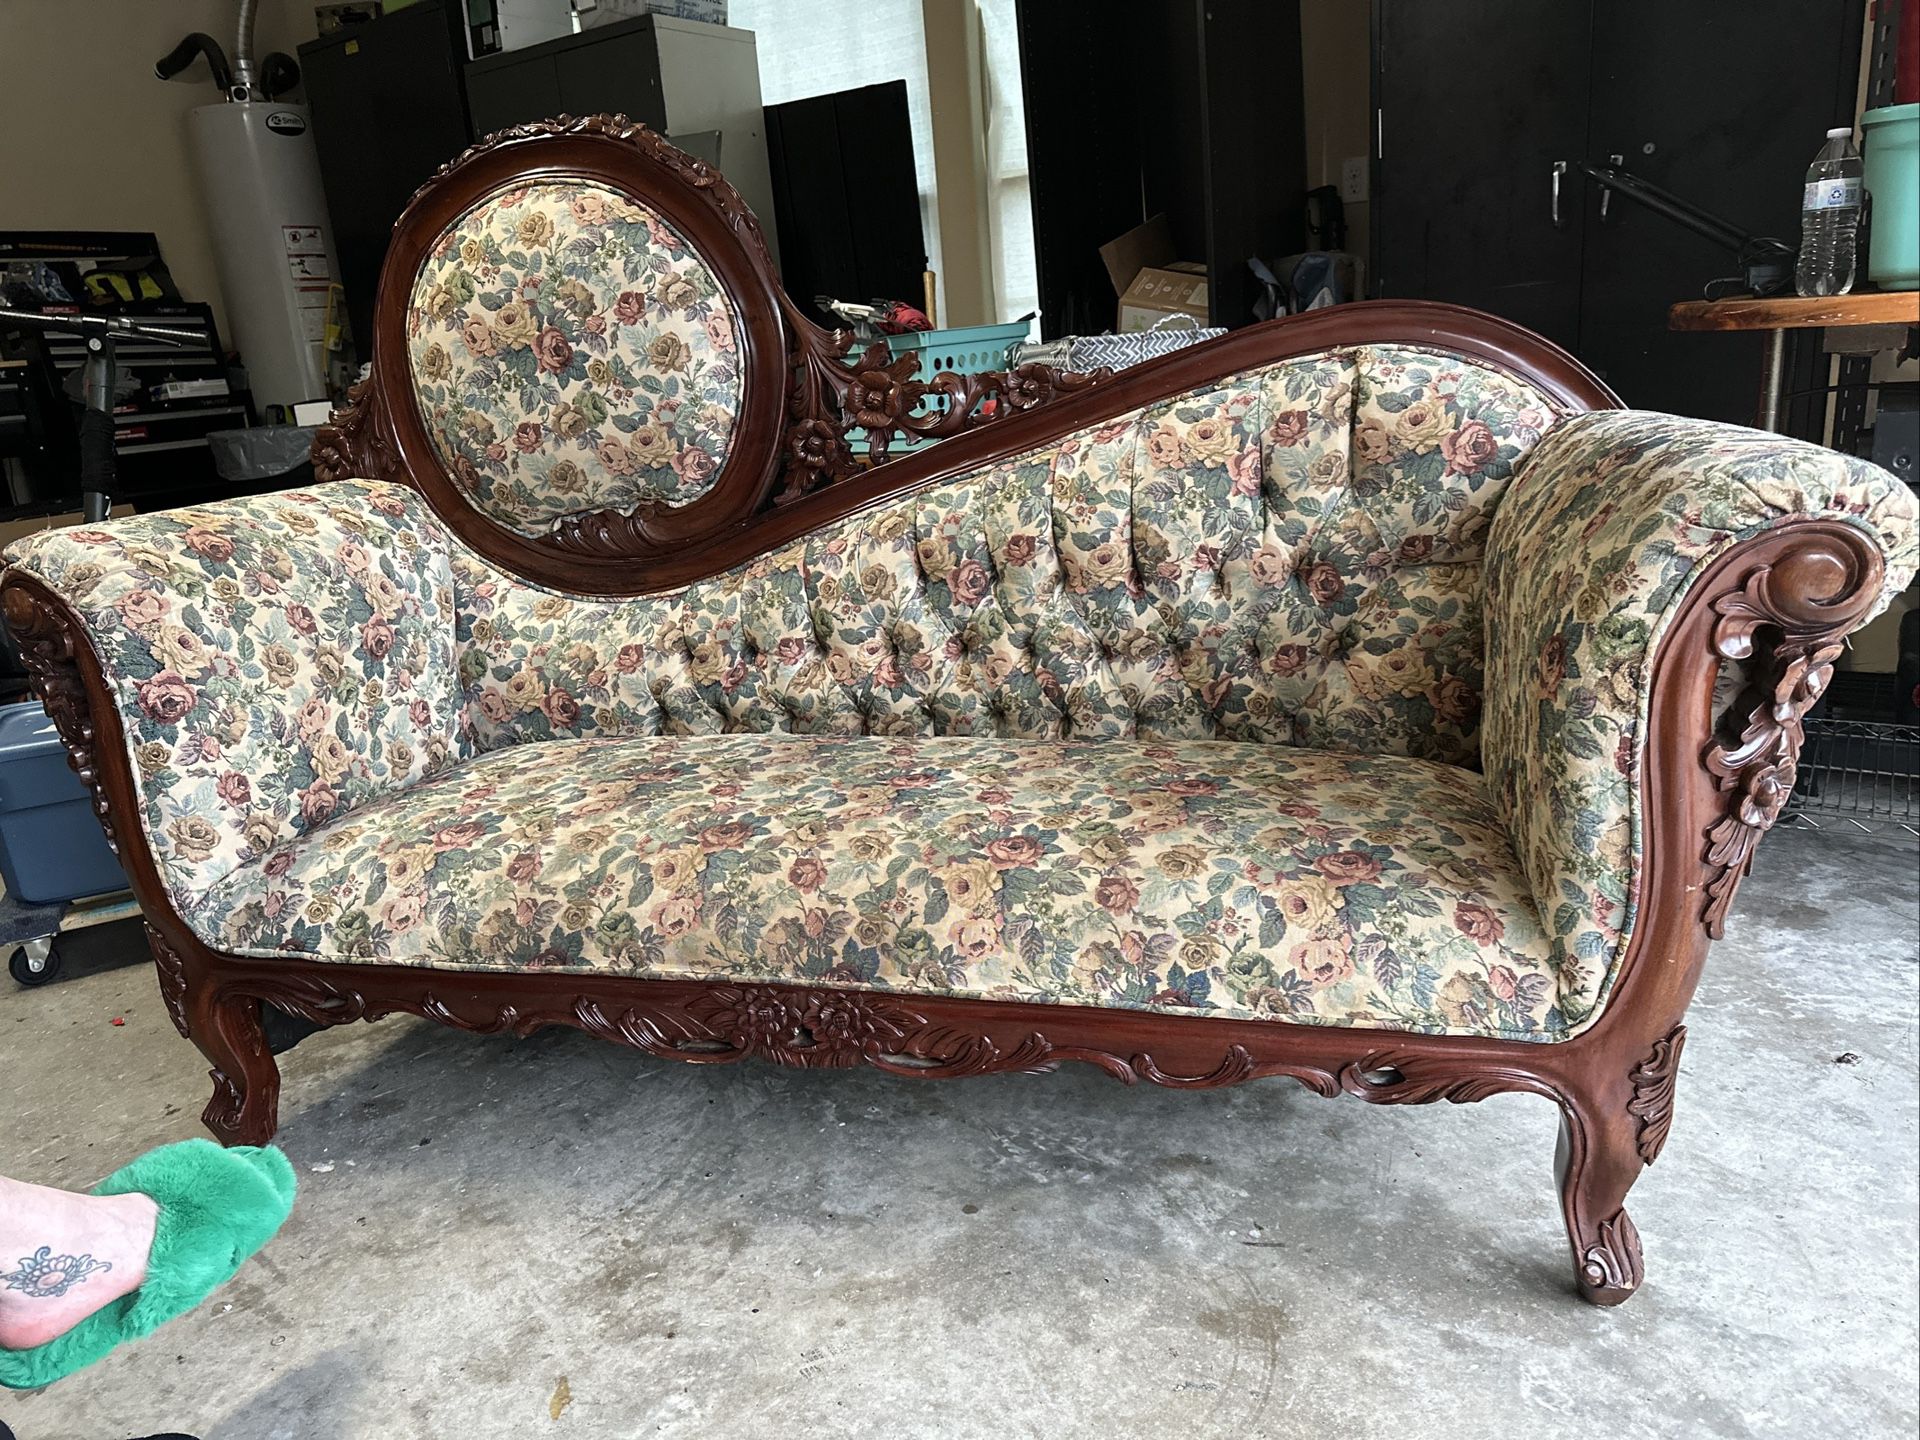 Late 1800s Antique Fainting Couch 